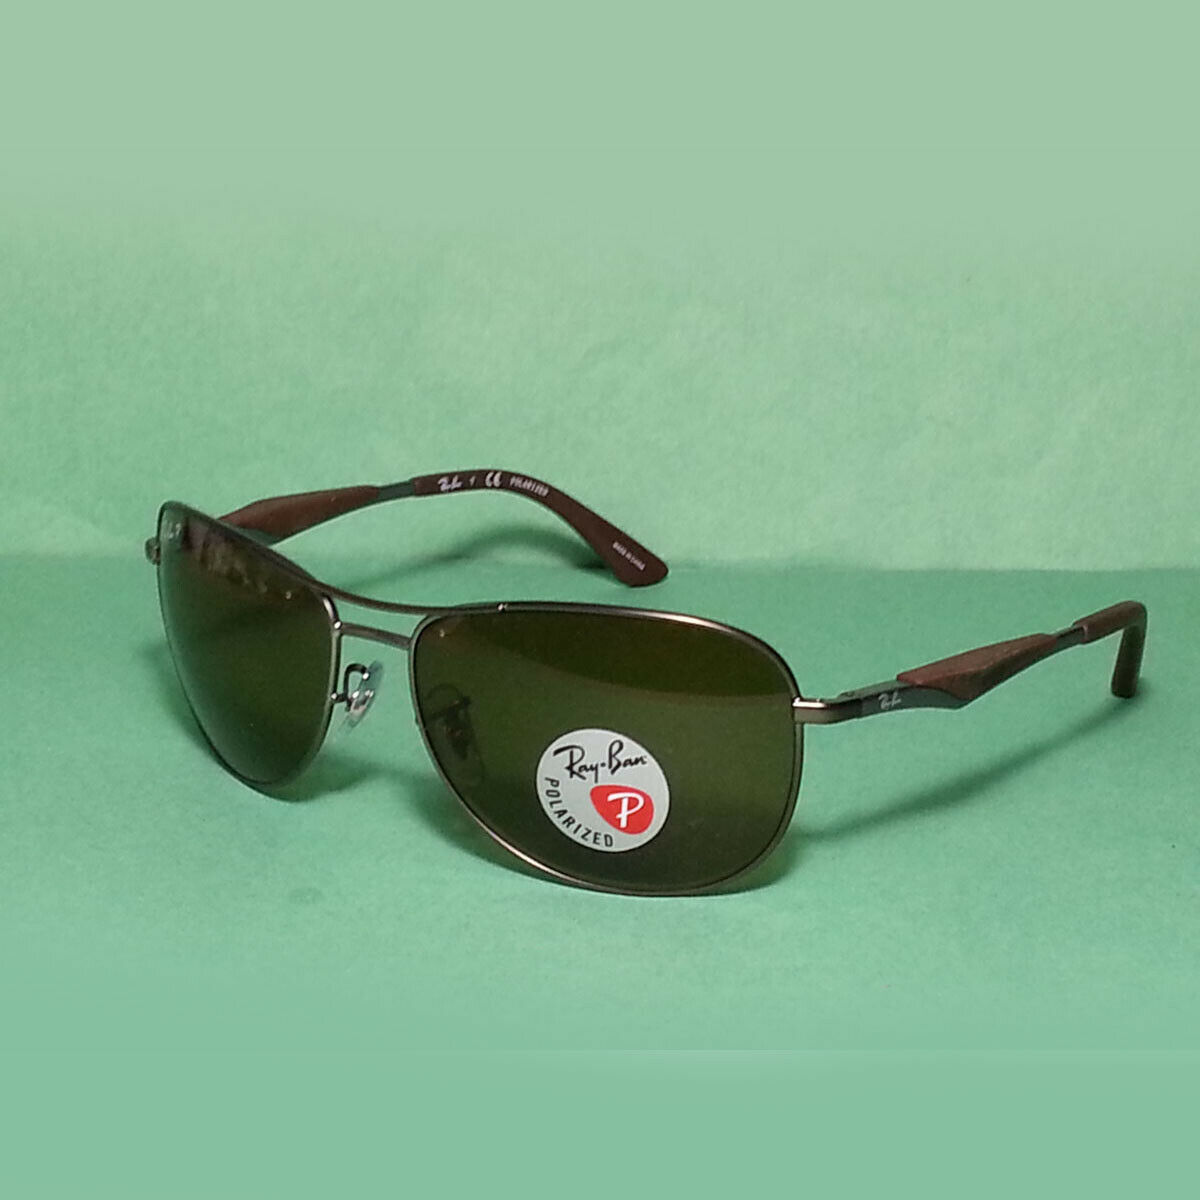 Ray Ban Polarized Sunglasses Rb 3519 Brown And 32 Similar Items